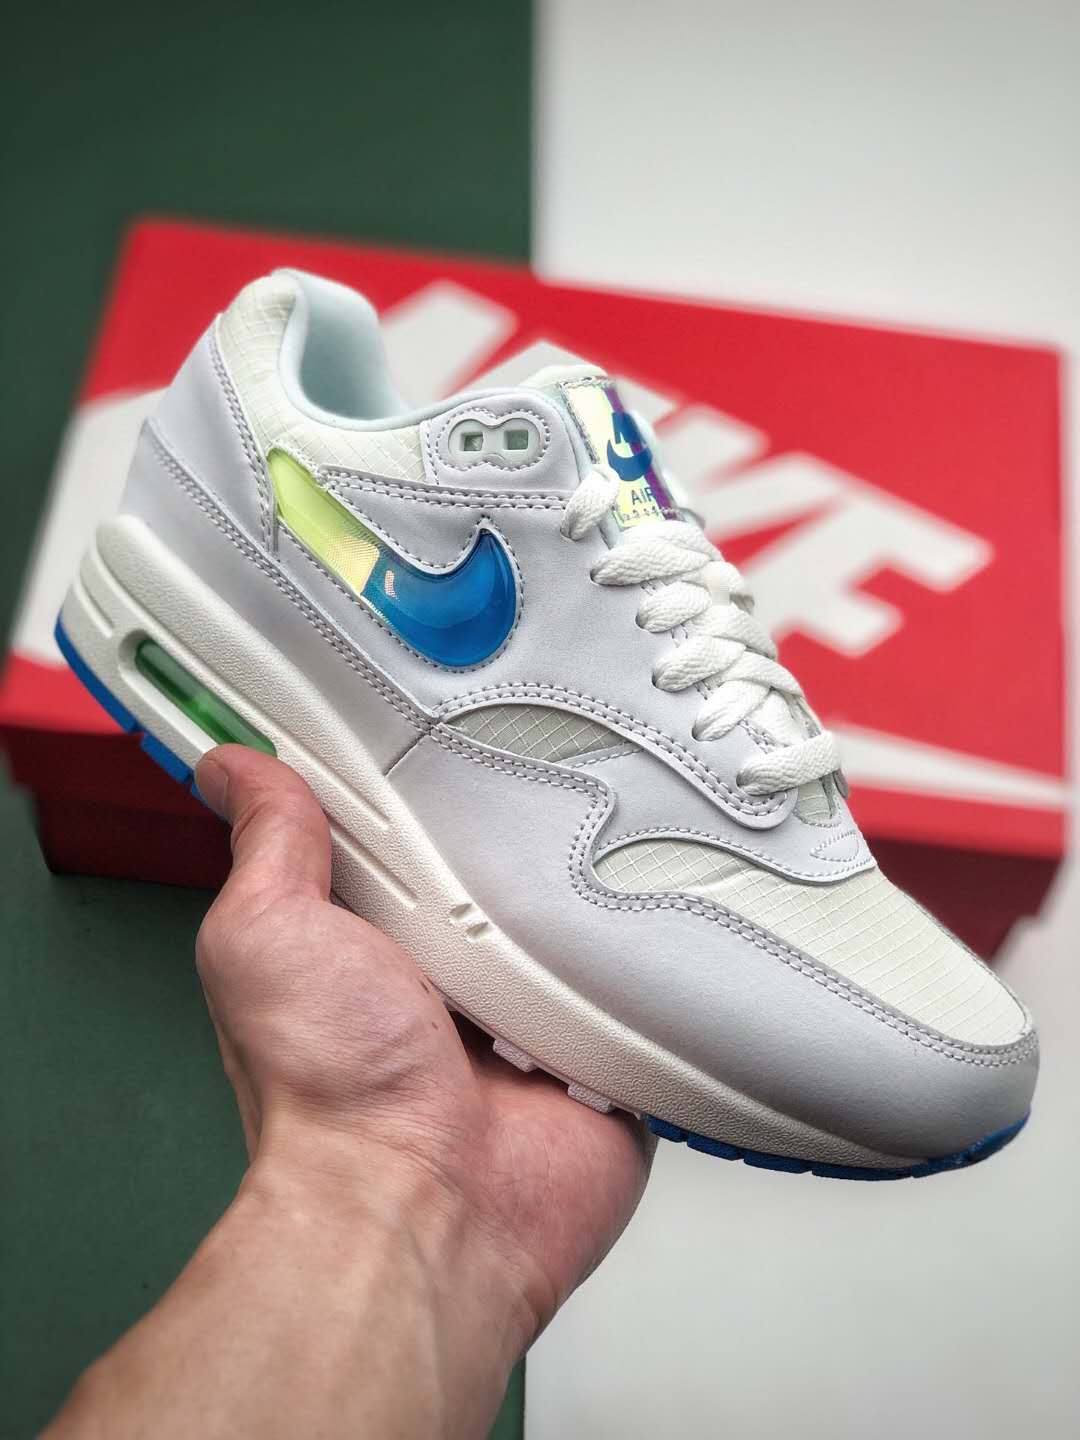 Nike Air Max 1 SE 'Jewel Swoosh' AO1021-101 - Shop now for iconic style